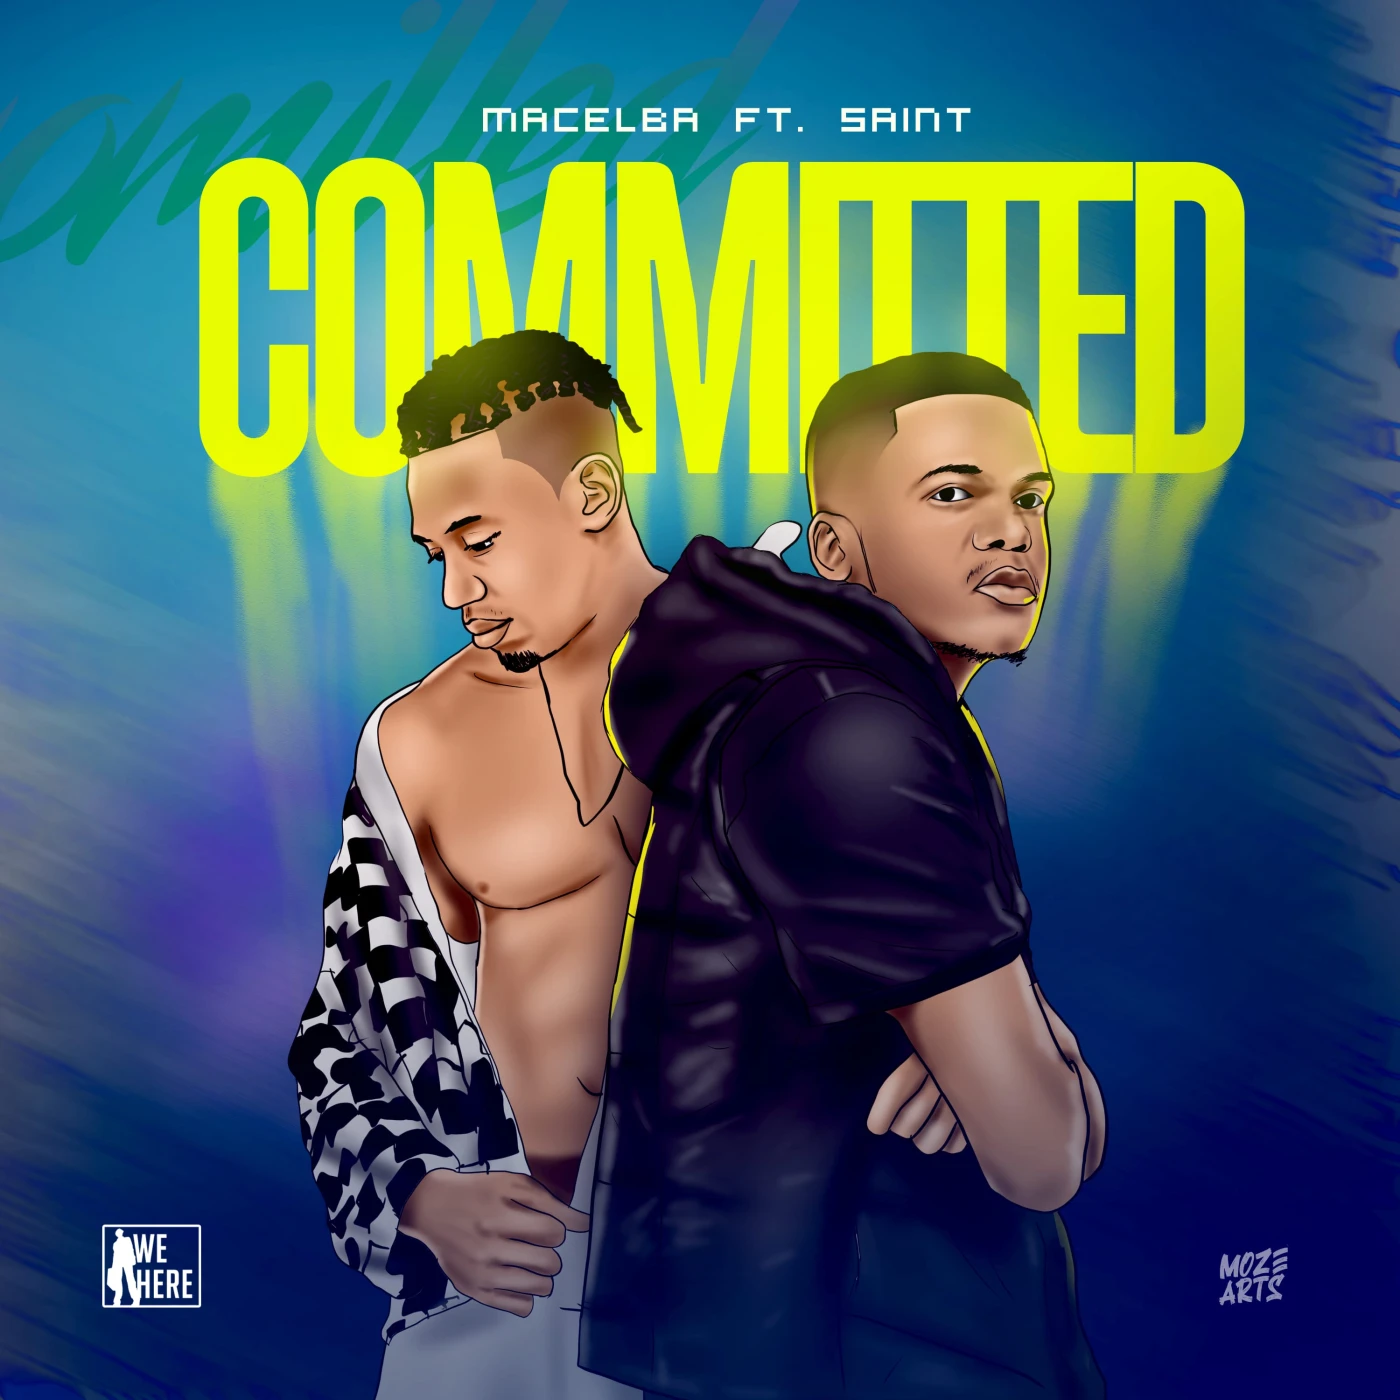 committed-feat-saint-macelba-Just Malawi Music